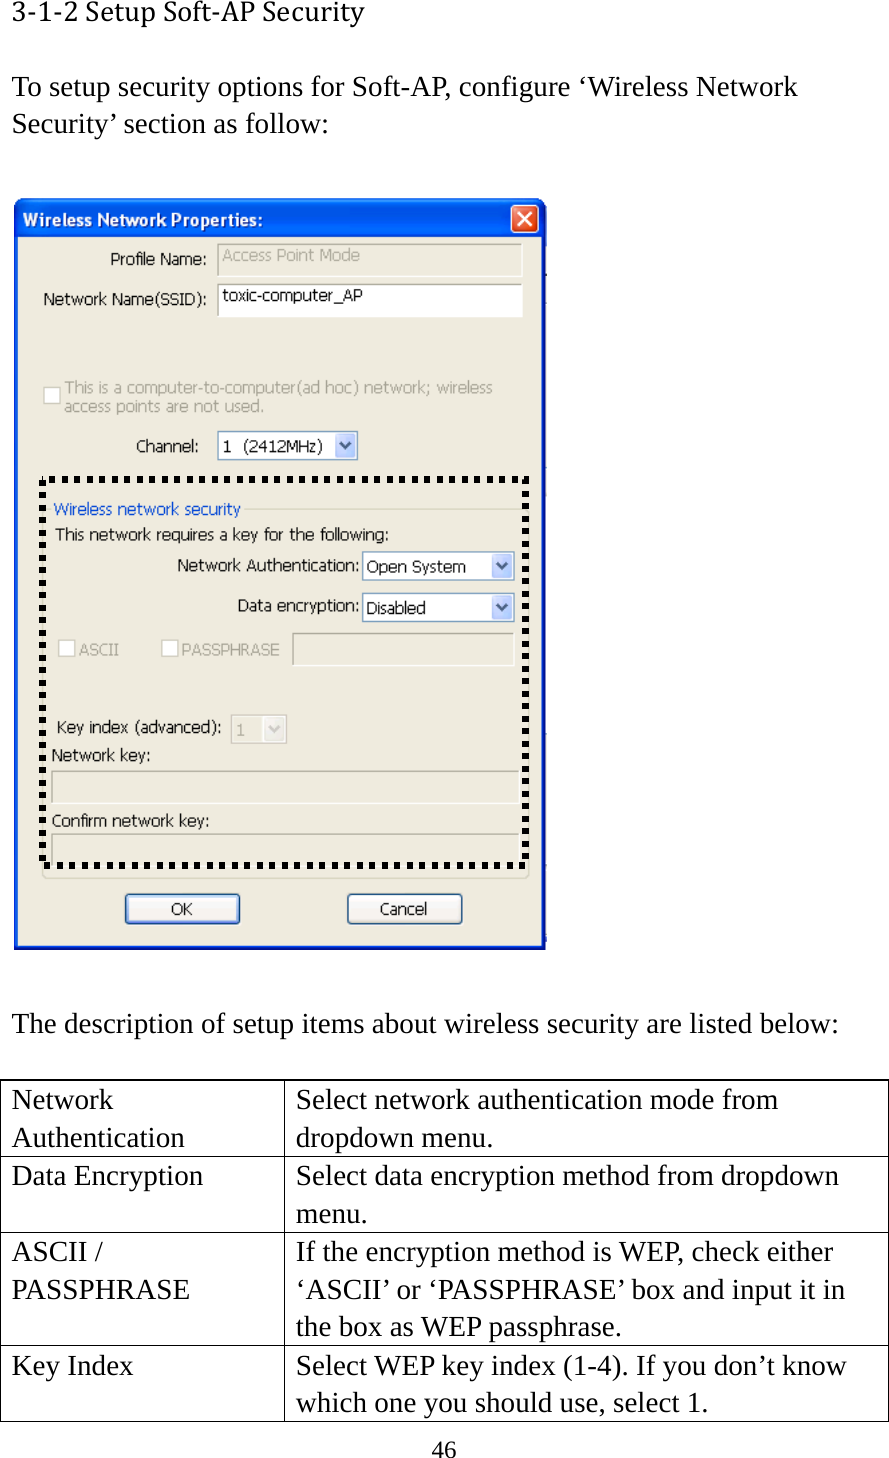 46  3‐1‐2SetupSoft‐APSecurity To setup security options for Soft-AP, configure ‘Wireless Network Security’ section as follow:    The description of setup items about wireless security are listed below:  Network Authentication Select network authentication mode from dropdown menu. Data Encryption  Select data encryption method from dropdown menu. ASCII / PASSPHRASE If the encryption method is WEP, check either ‘ASCII’ or ‘PASSPHRASE’ box and input it in the box as WEP passphrase. Key Index  Select WEP key index (1-4). If you don’t know which one you should use, select 1. 